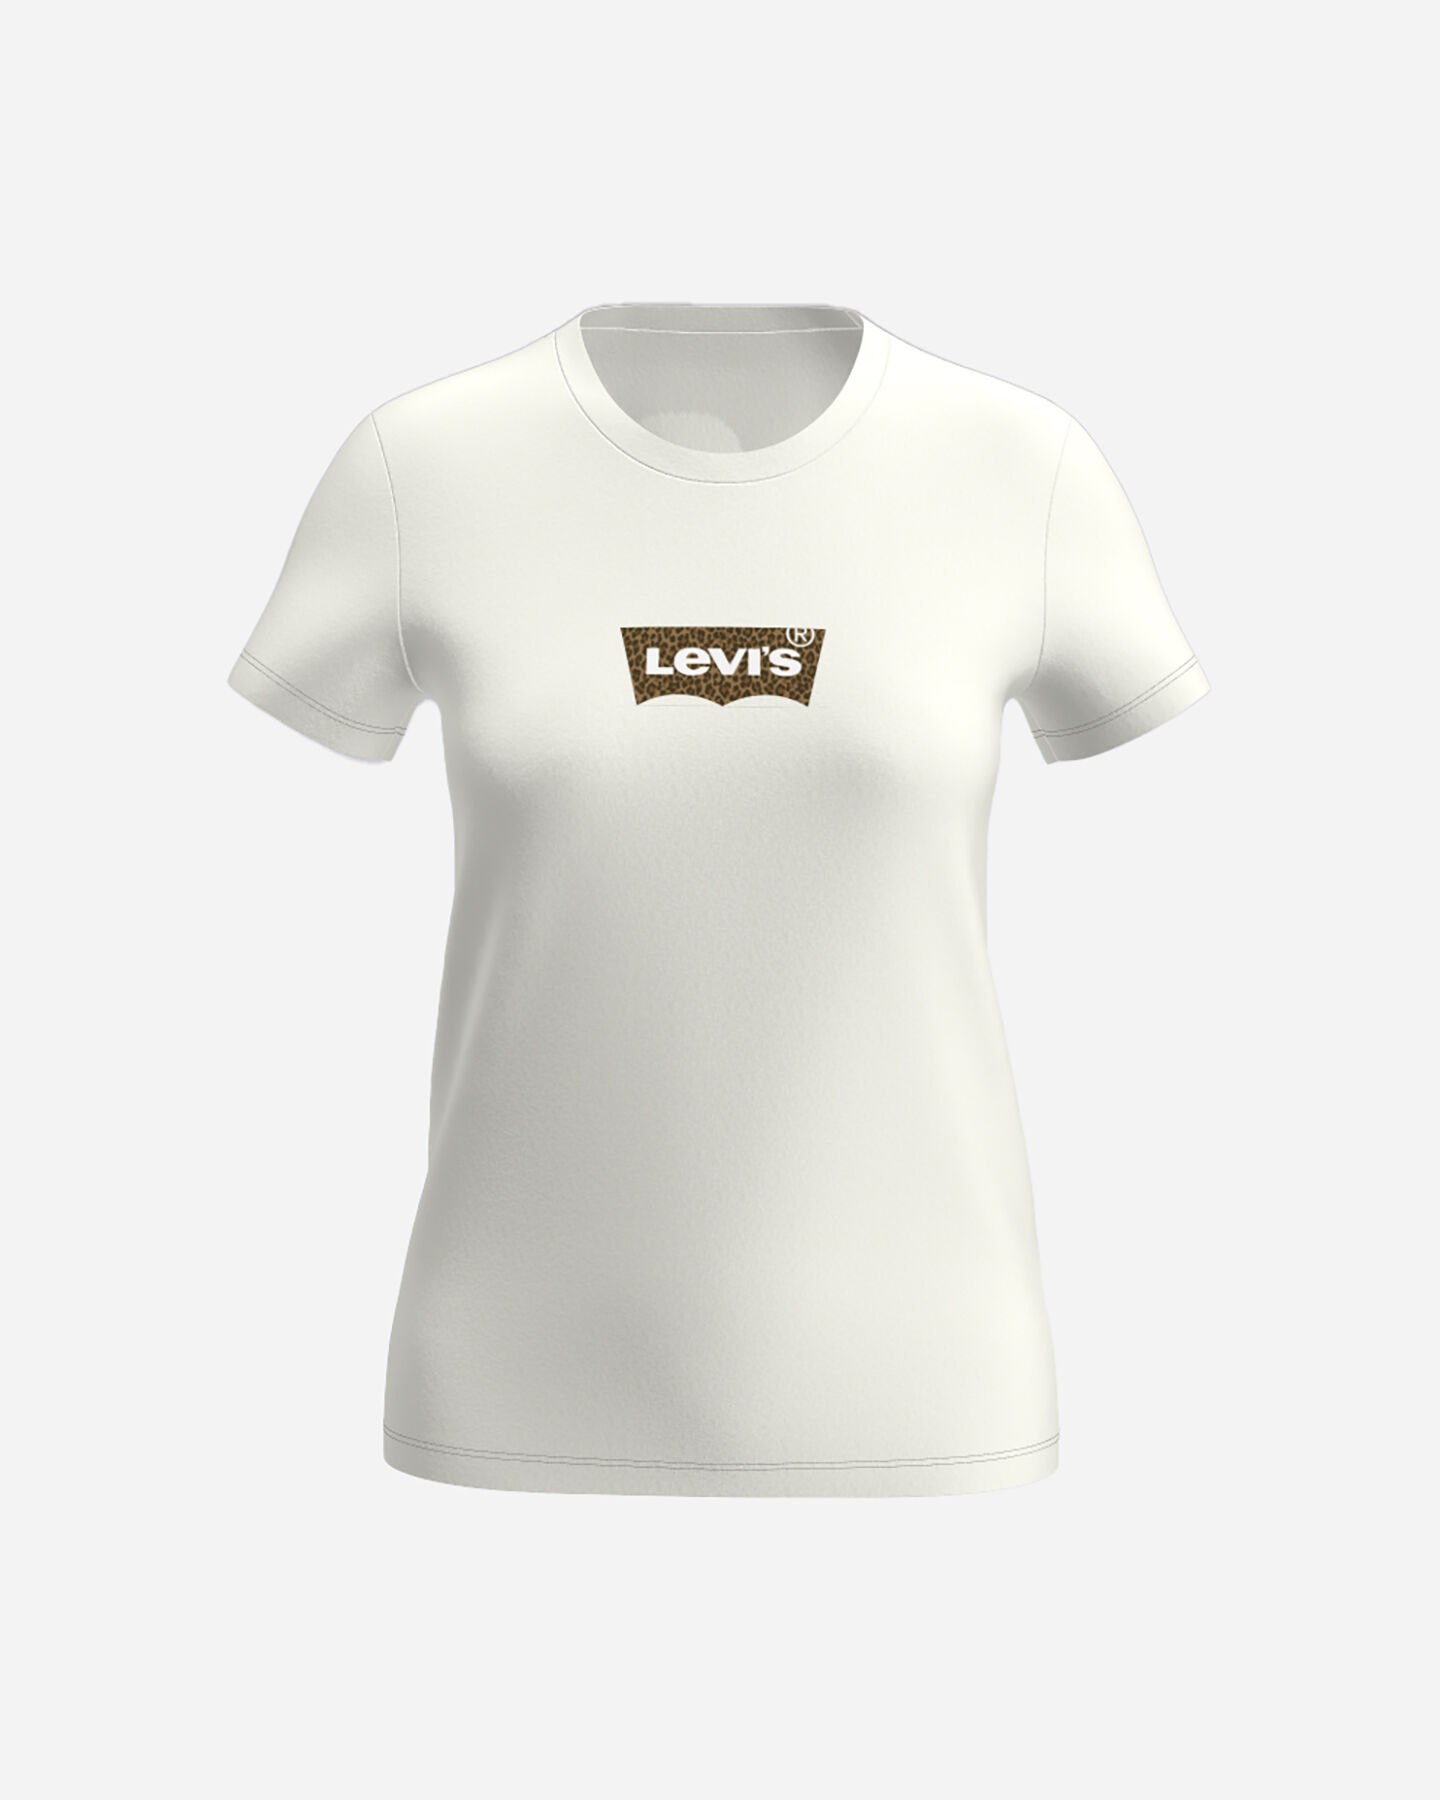  T-Shirt LEVI'S LOGO BATWING W S4126139|0072|L scatto 0